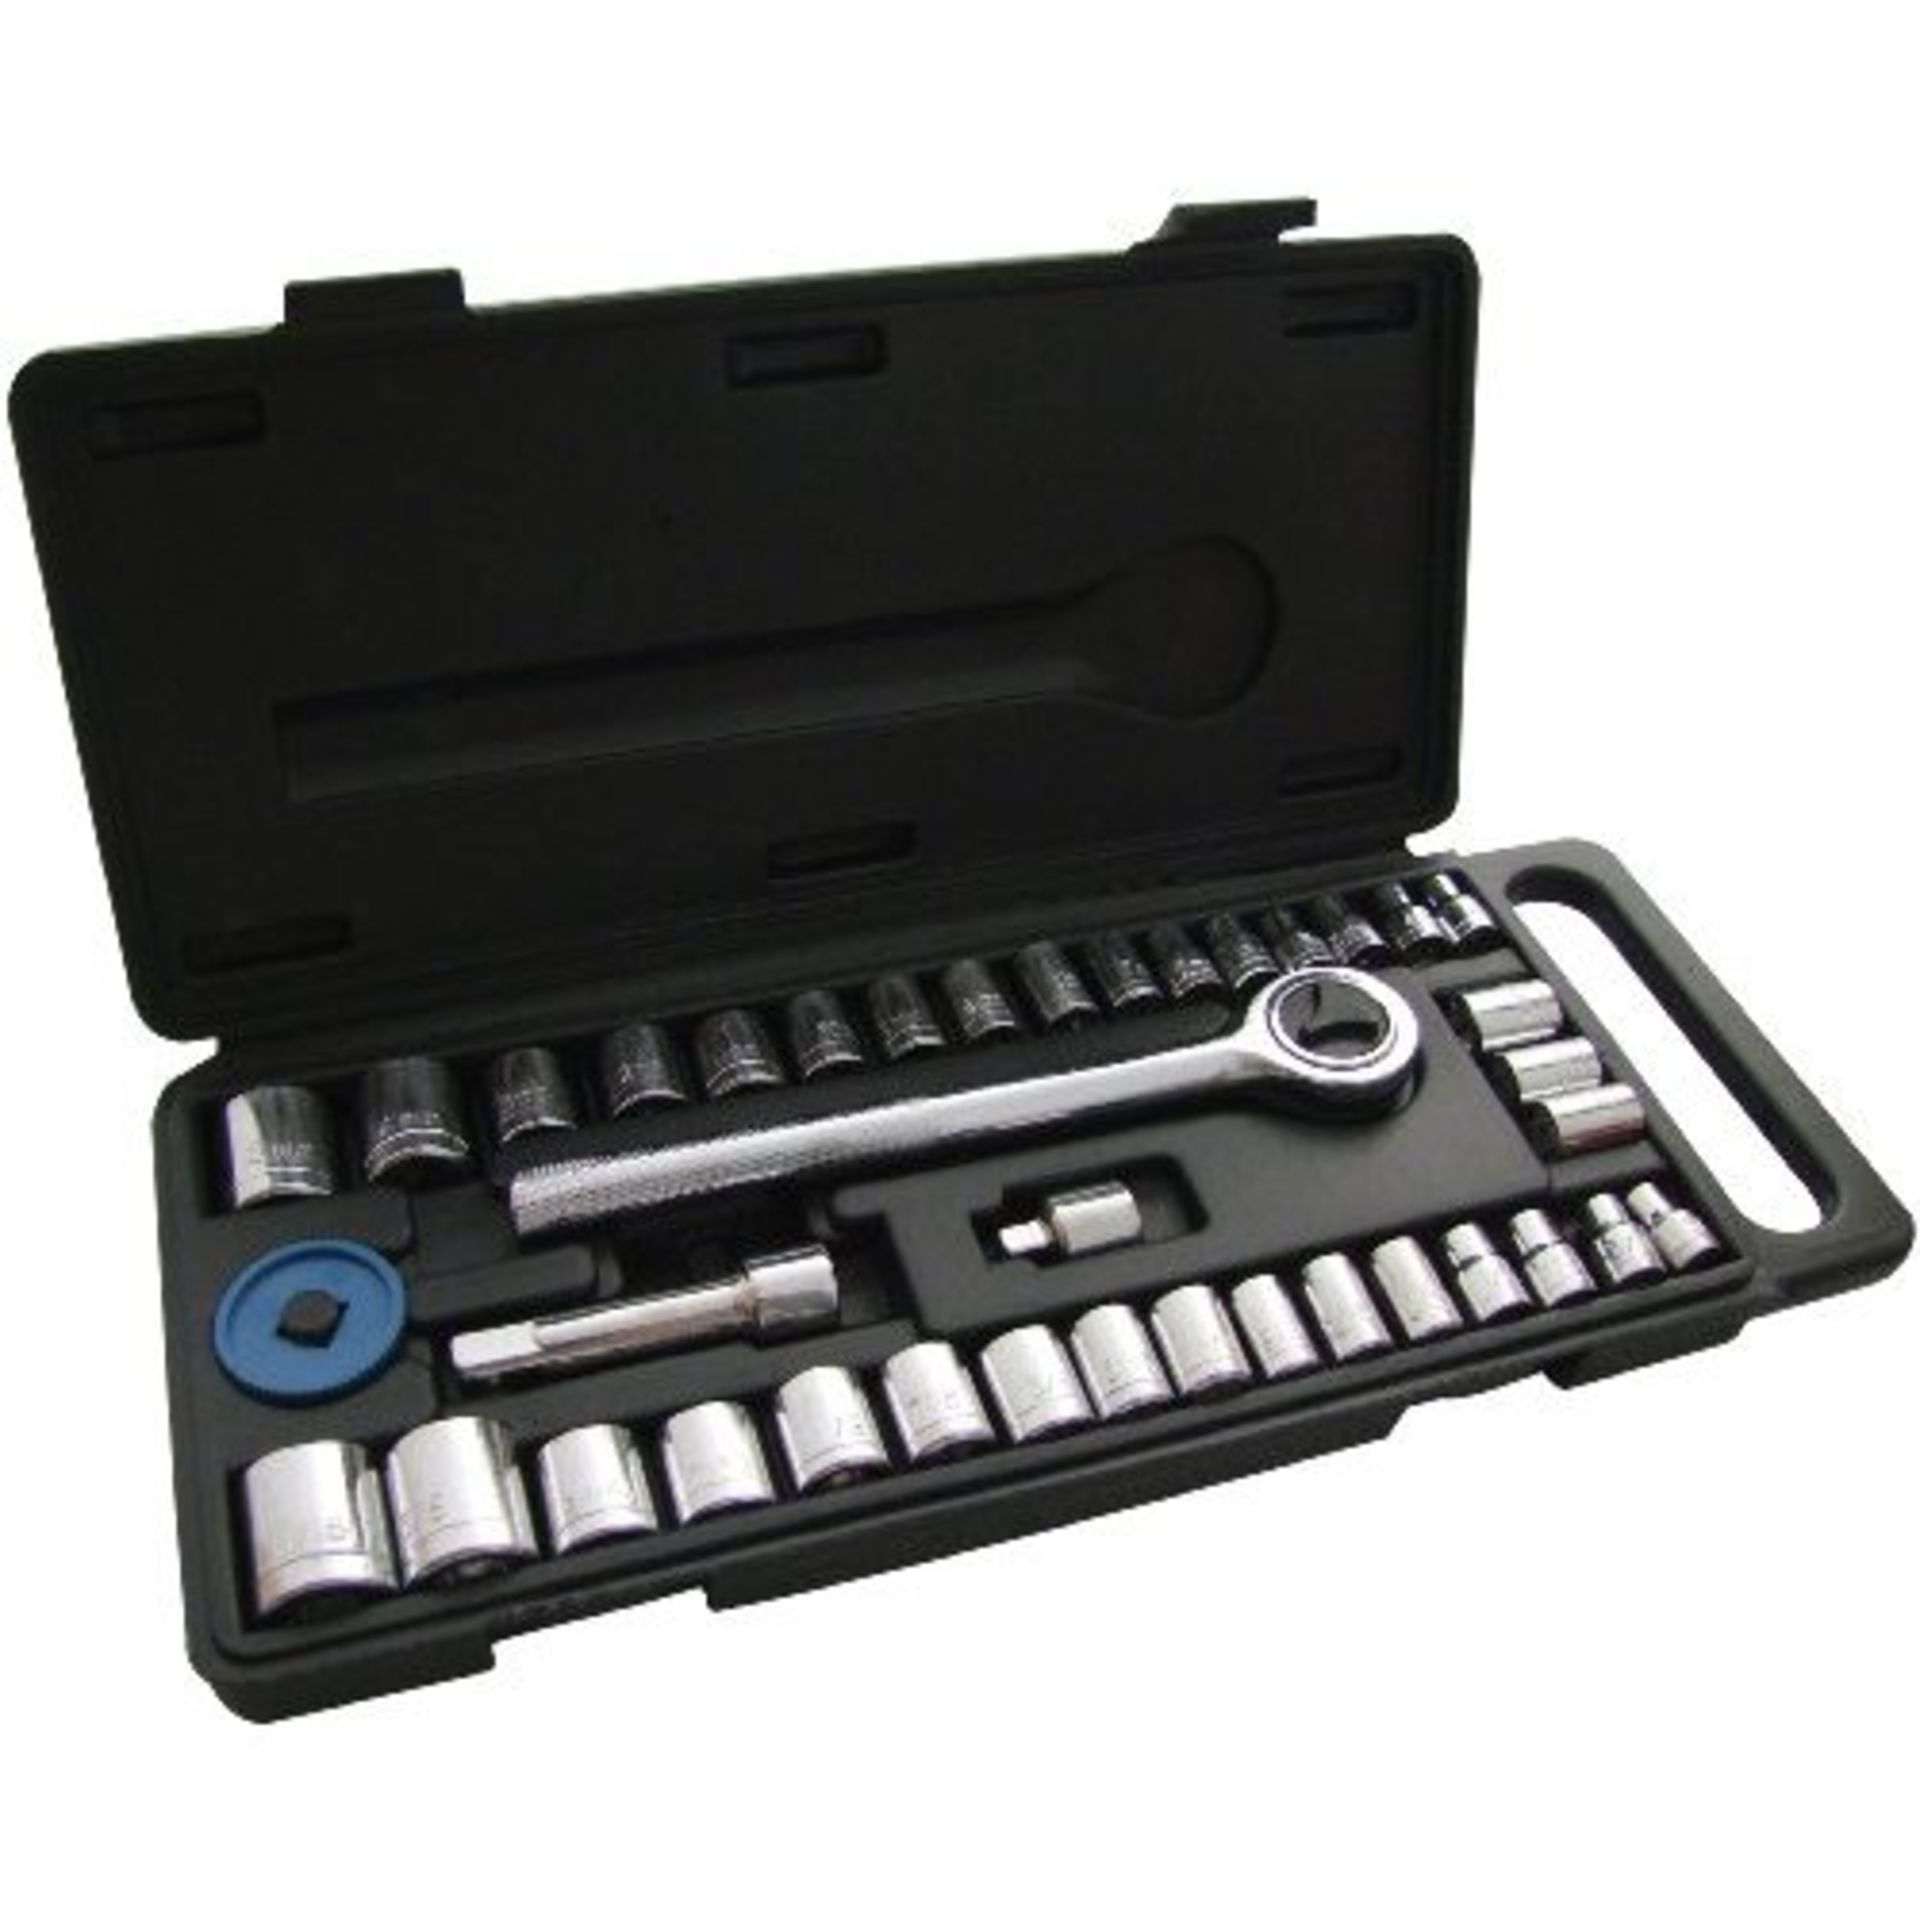 V Brand New 40 Piece Socket Set X 2 YOUR BID PRICE TO BE MULTIPLIED BY TWO